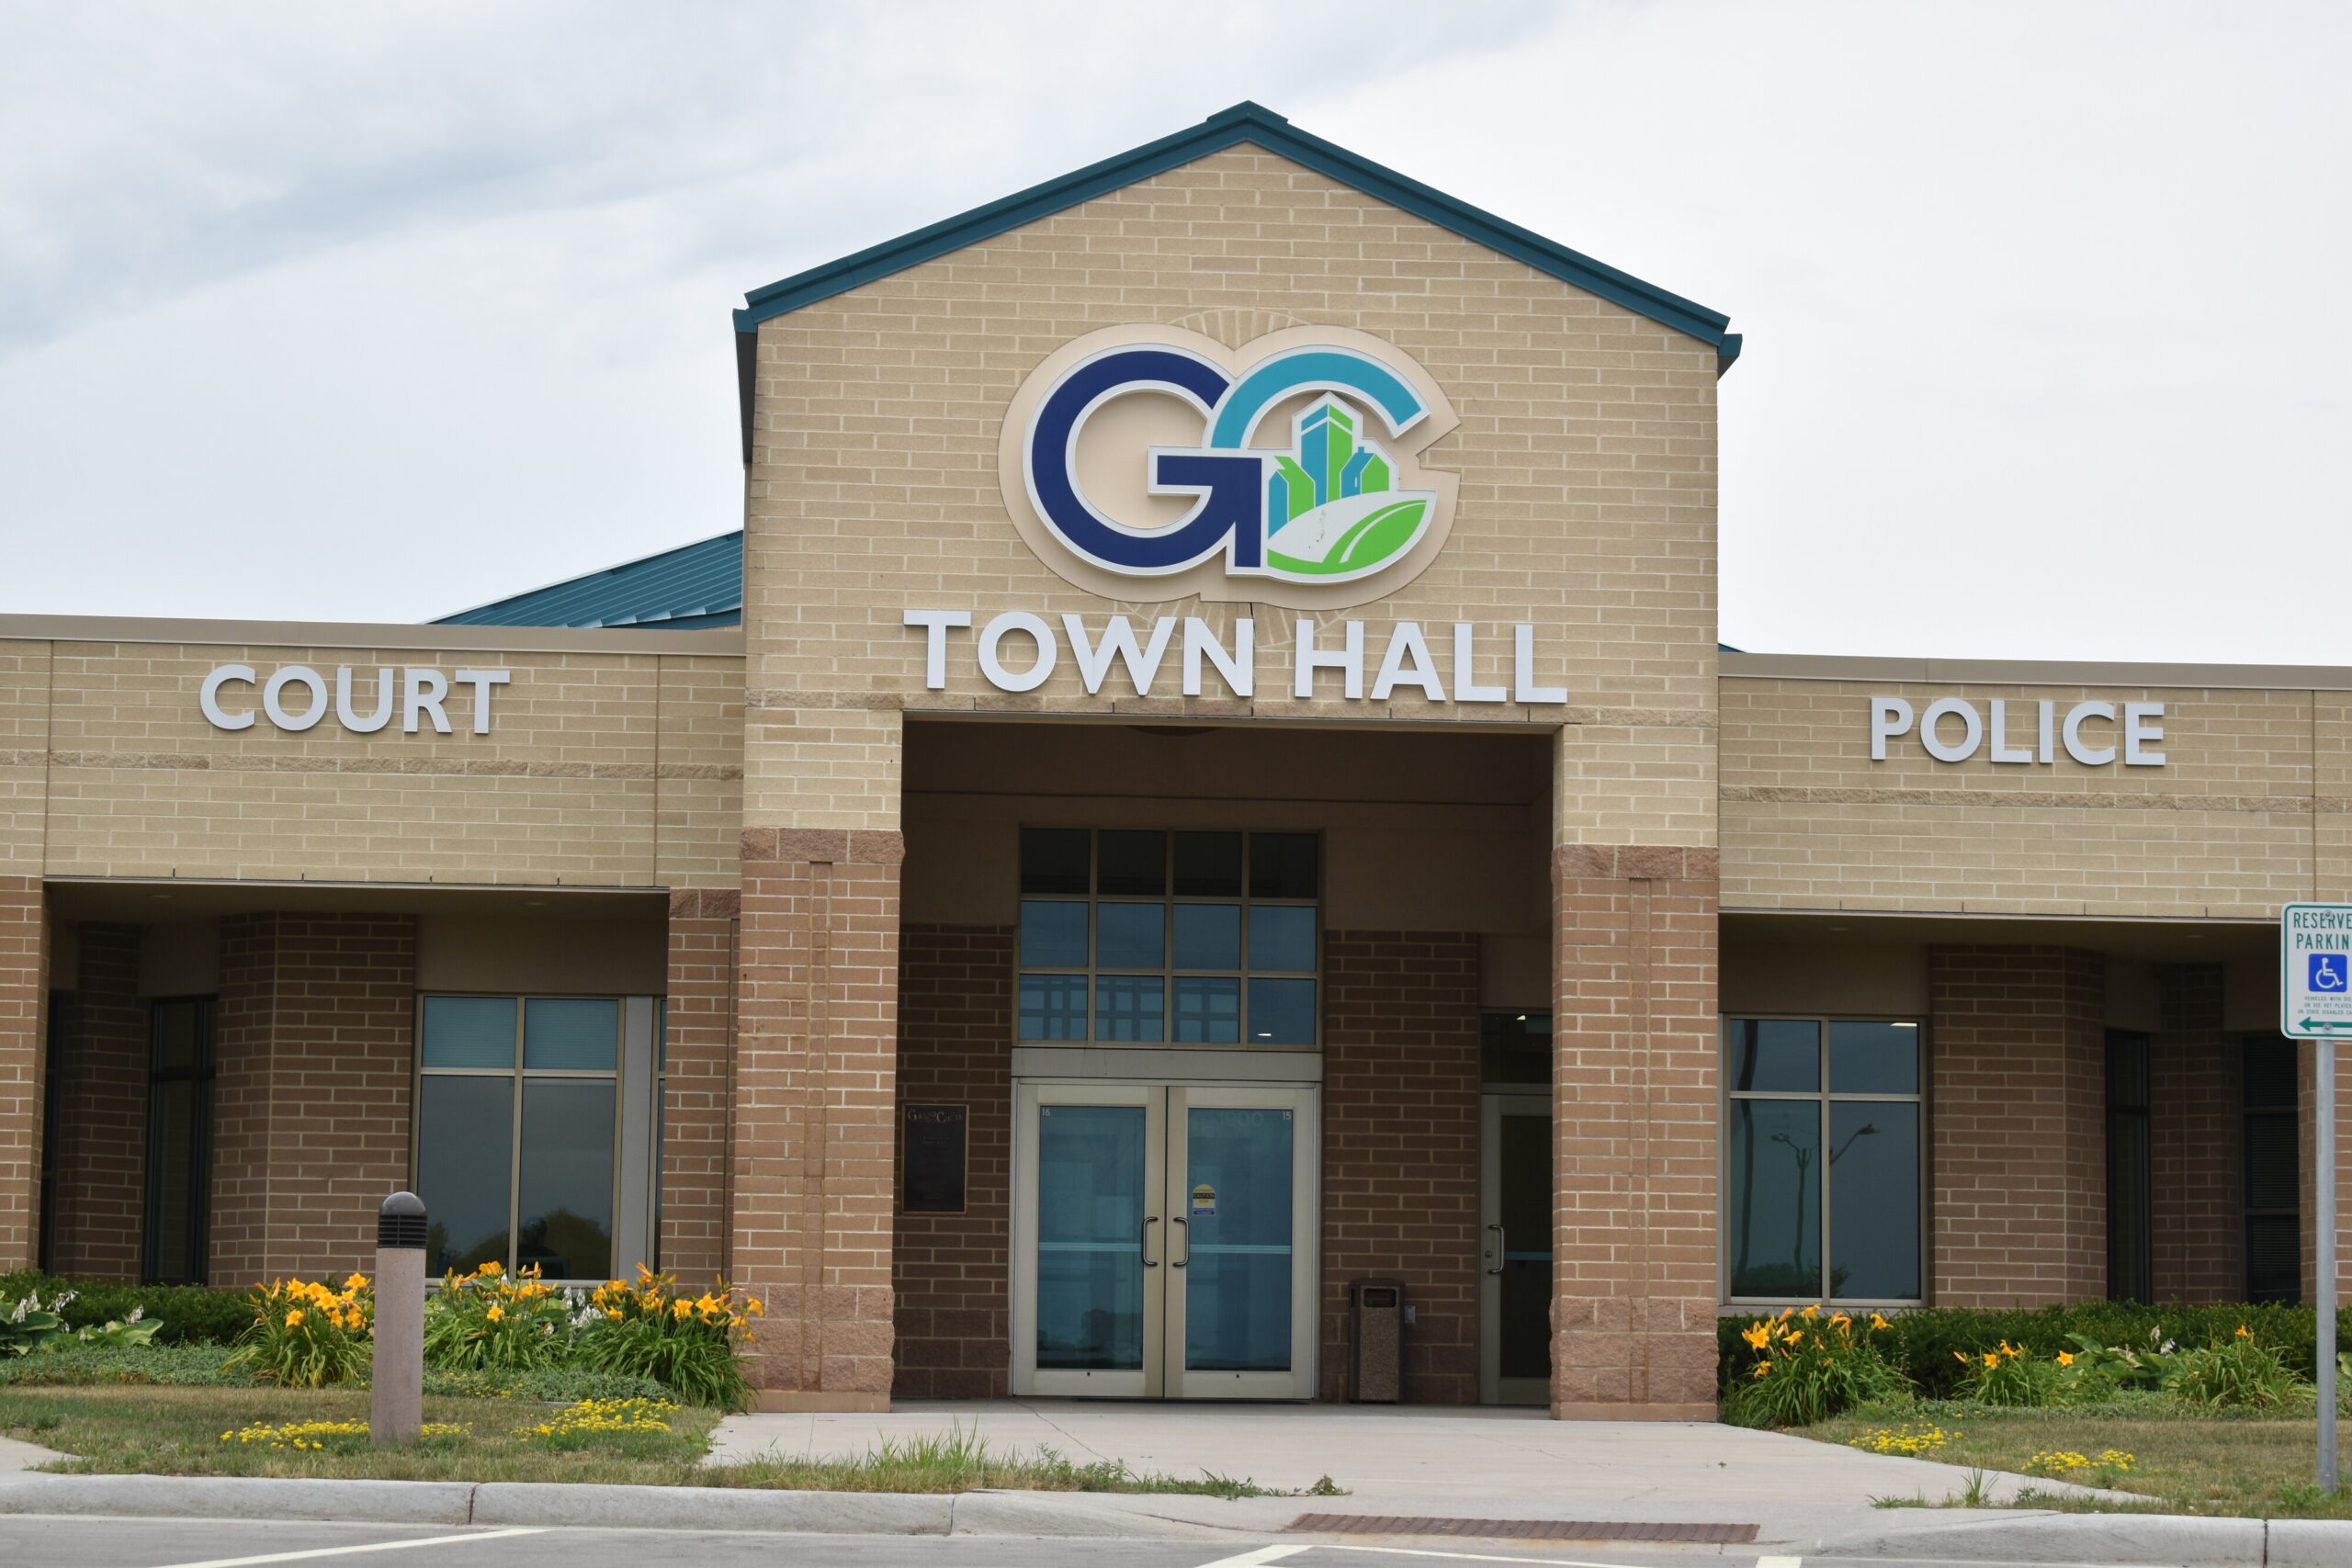 Grand Chute Town Hall in the Fox Valley